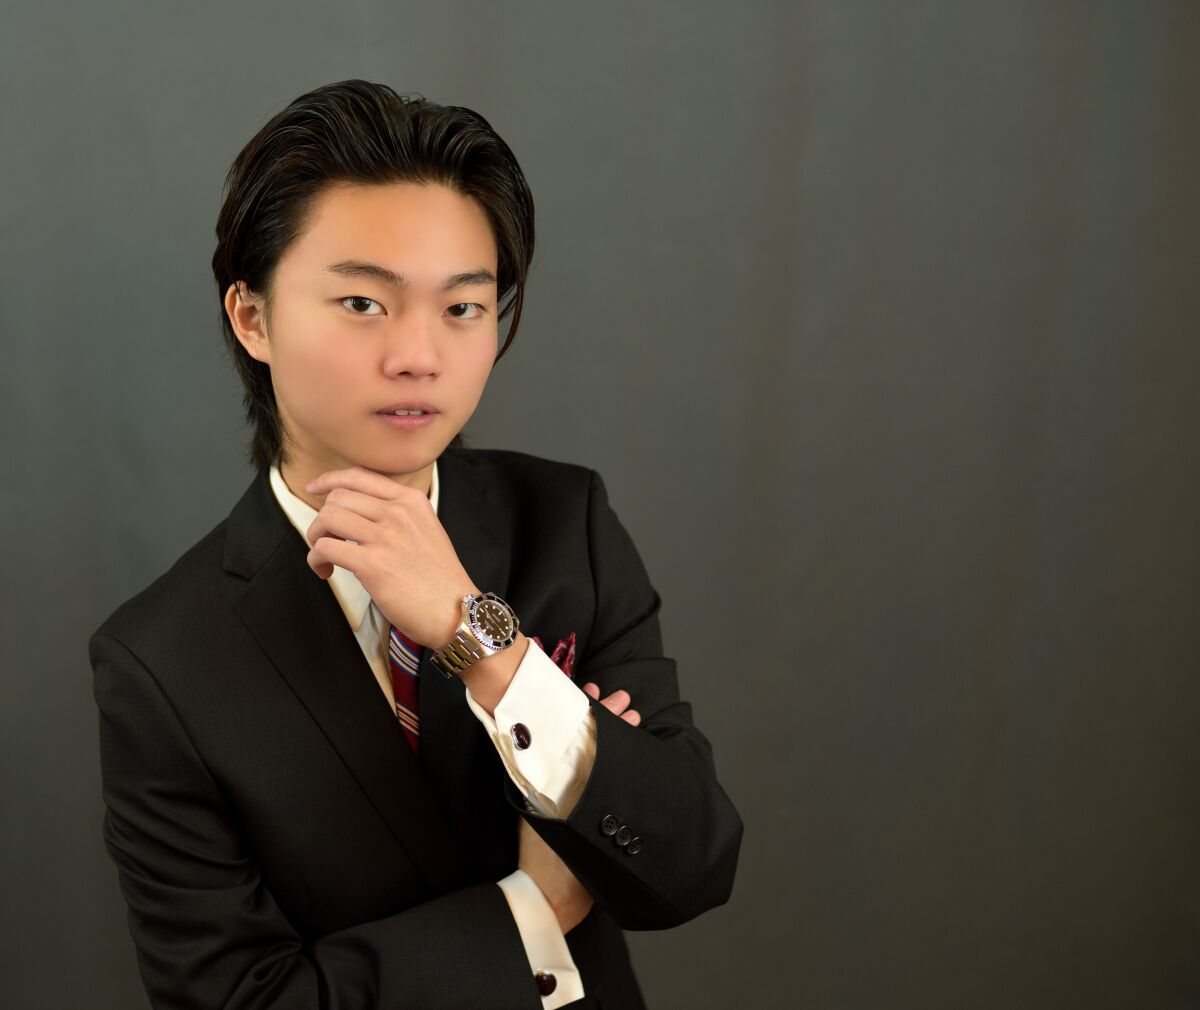 Pianist Ray Ushikubo will be featured in the San Diego Symphony's New Year’s Eve celebration concert Dec. 31 online.